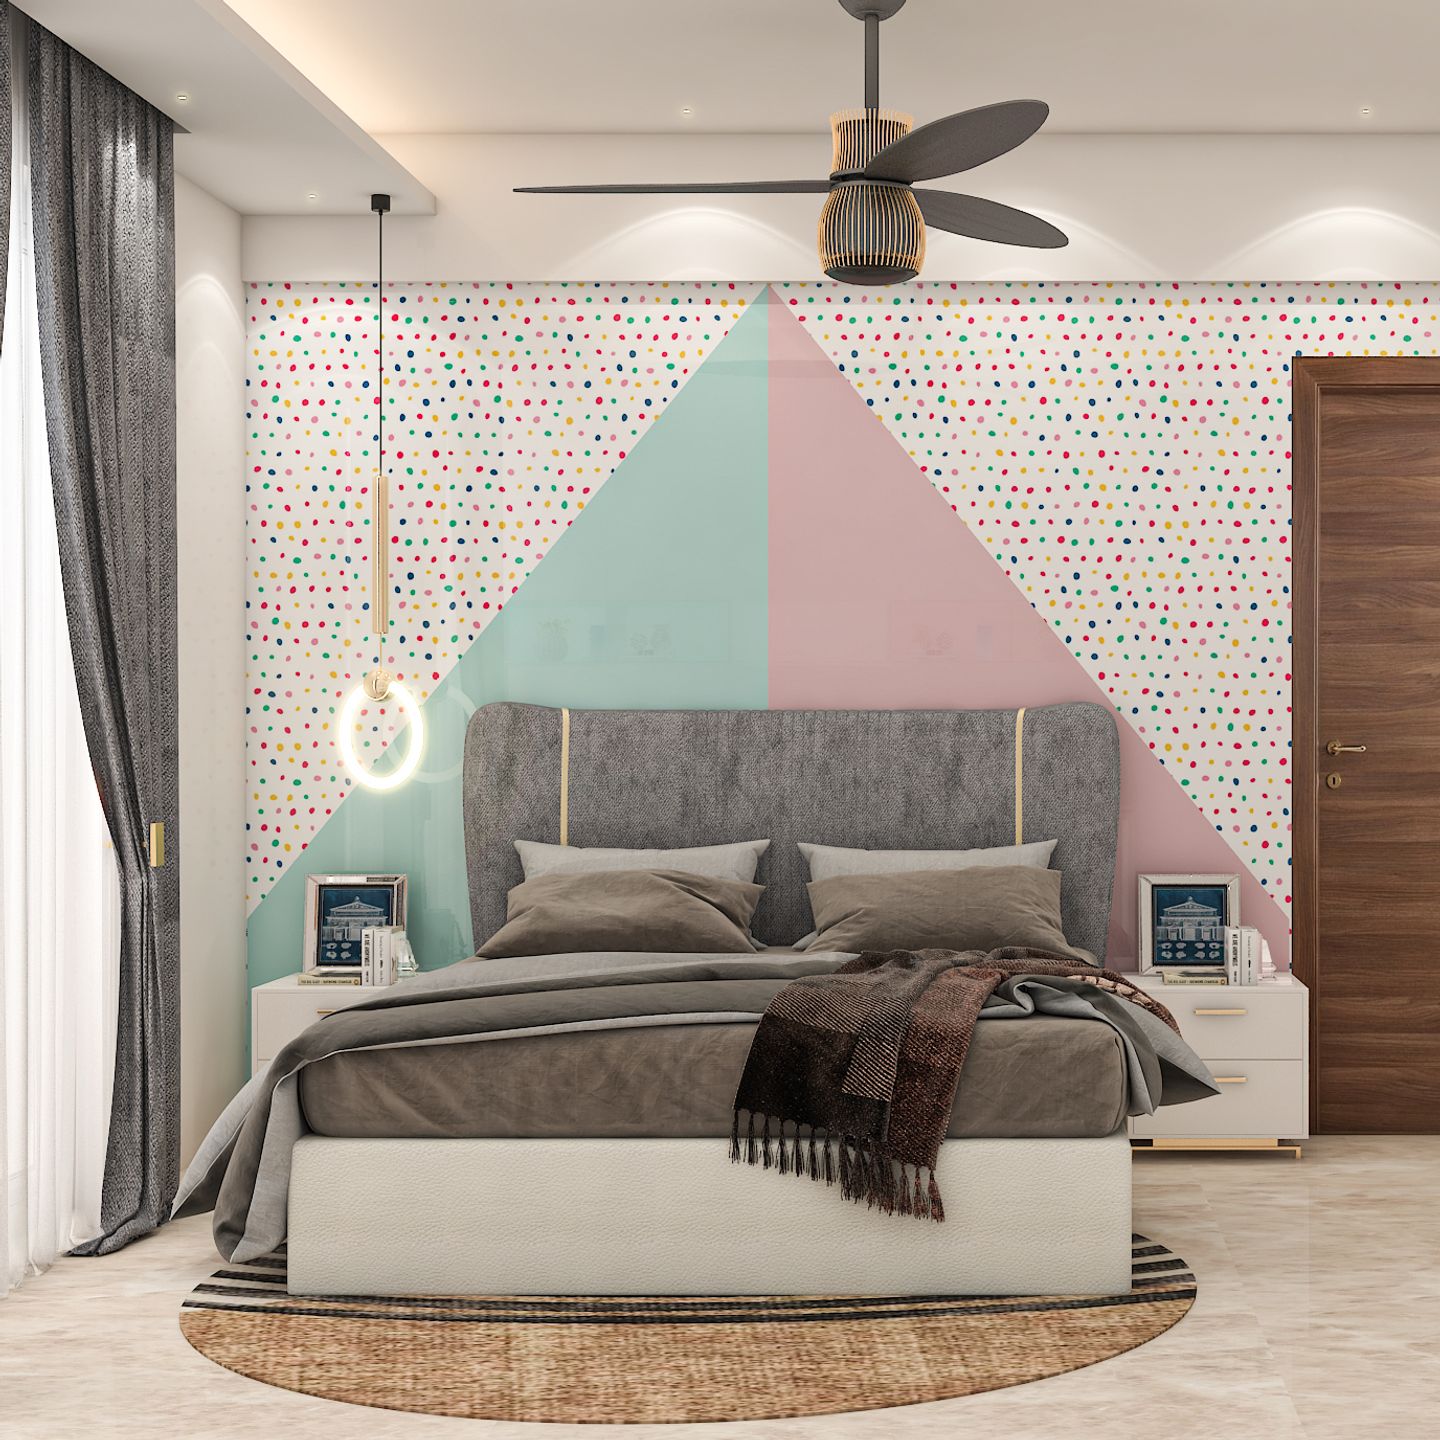 Multifunctional & Spacious Kids Bedroom Design With Colourful Interiors - Livspace